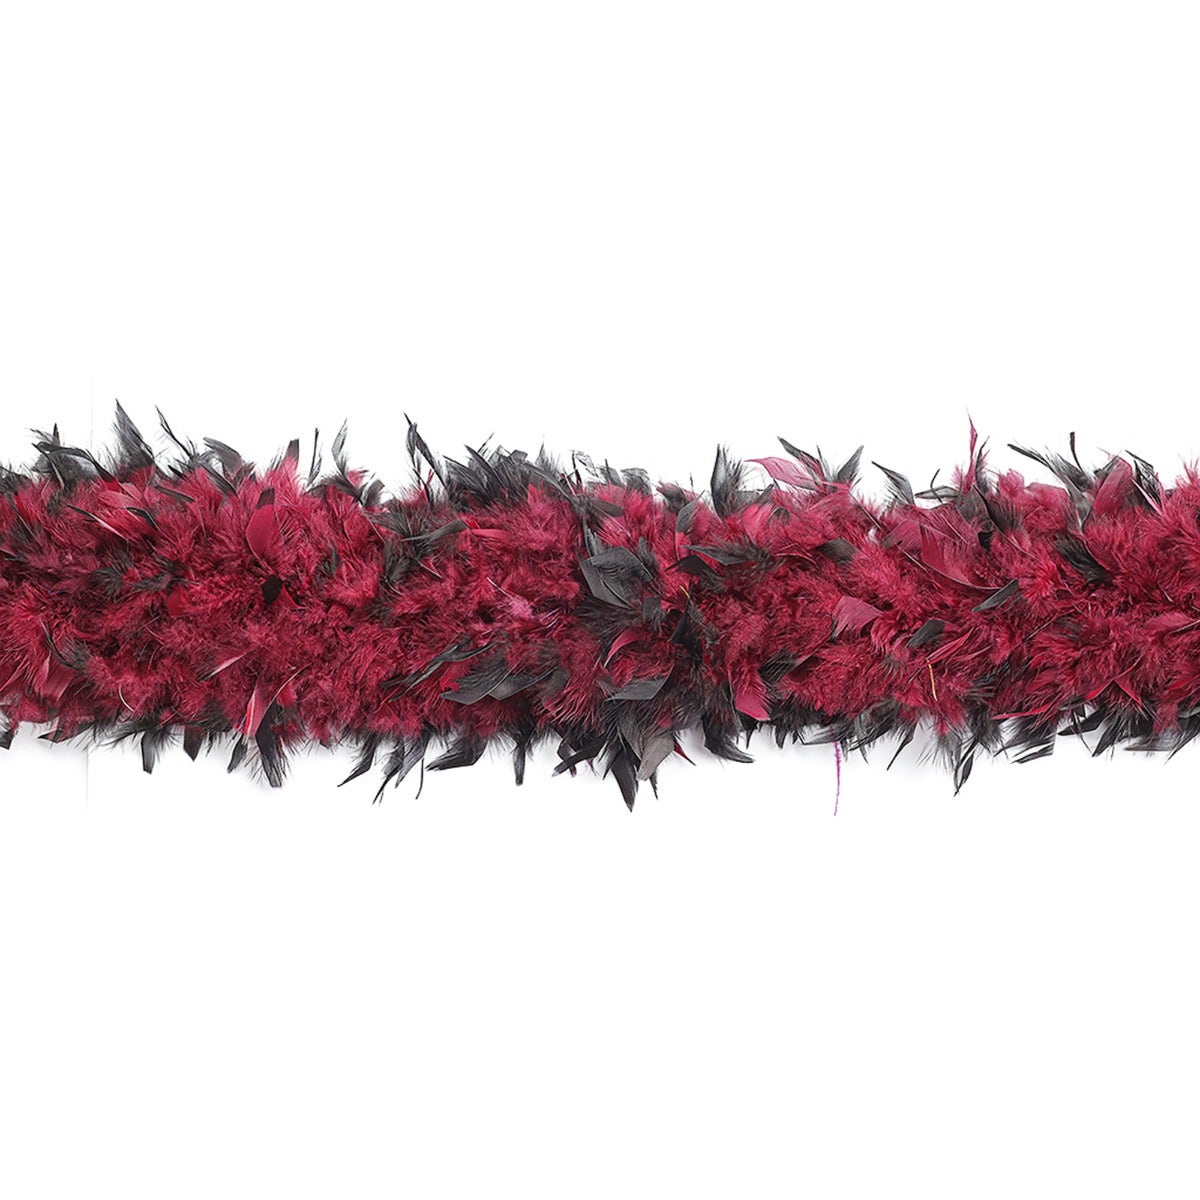 Pacific Trimming Chandelle Boa Feather Trim